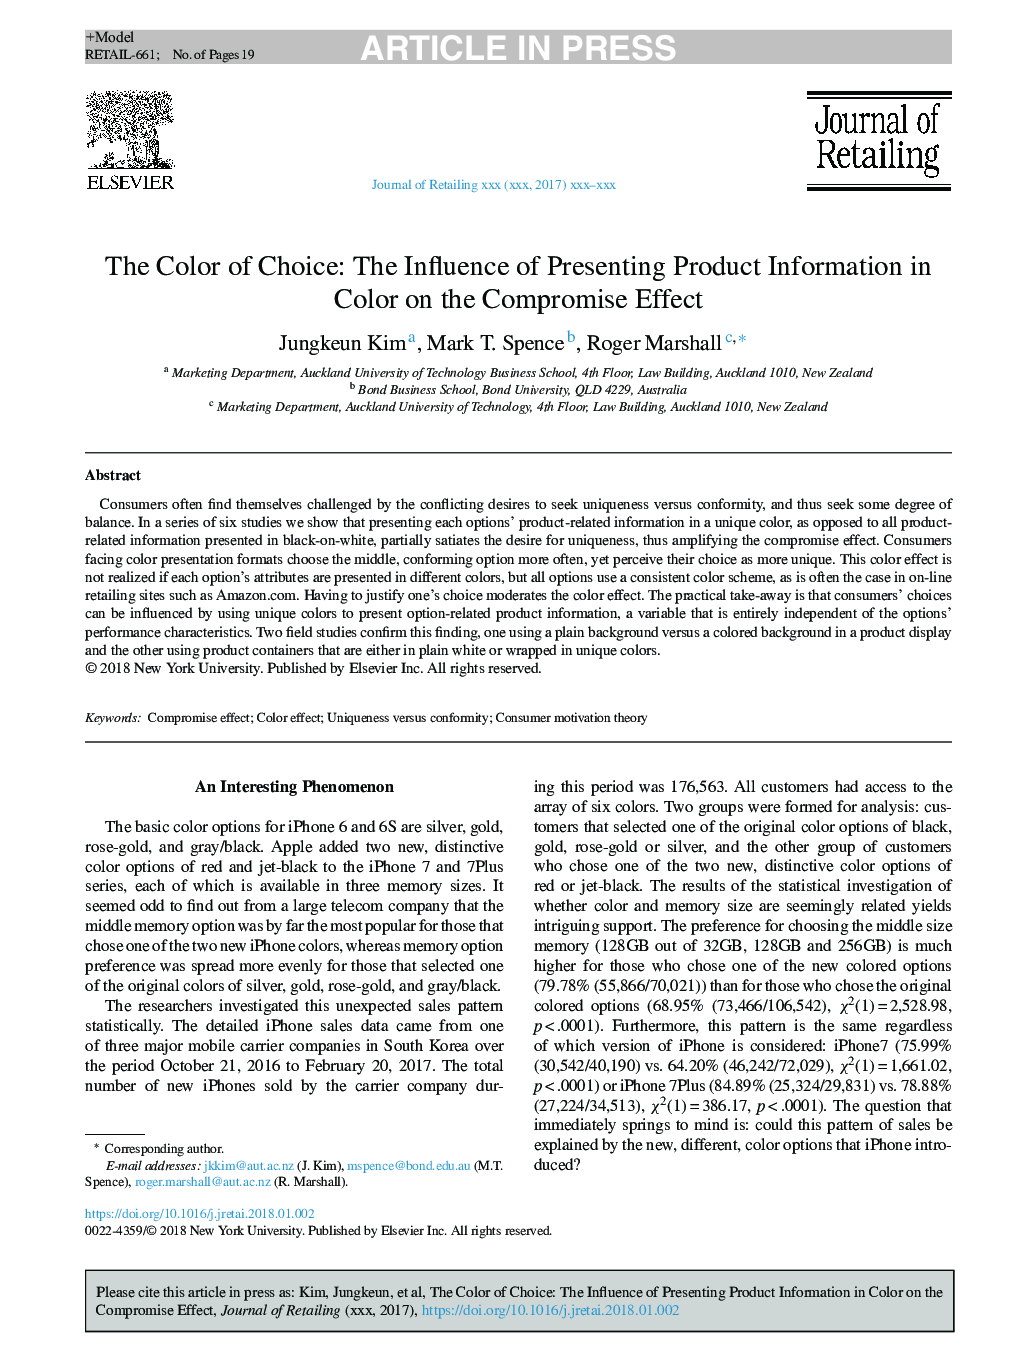 The Color of Choice: The Influence of Presenting Product Information in Color on the Compromise Effect